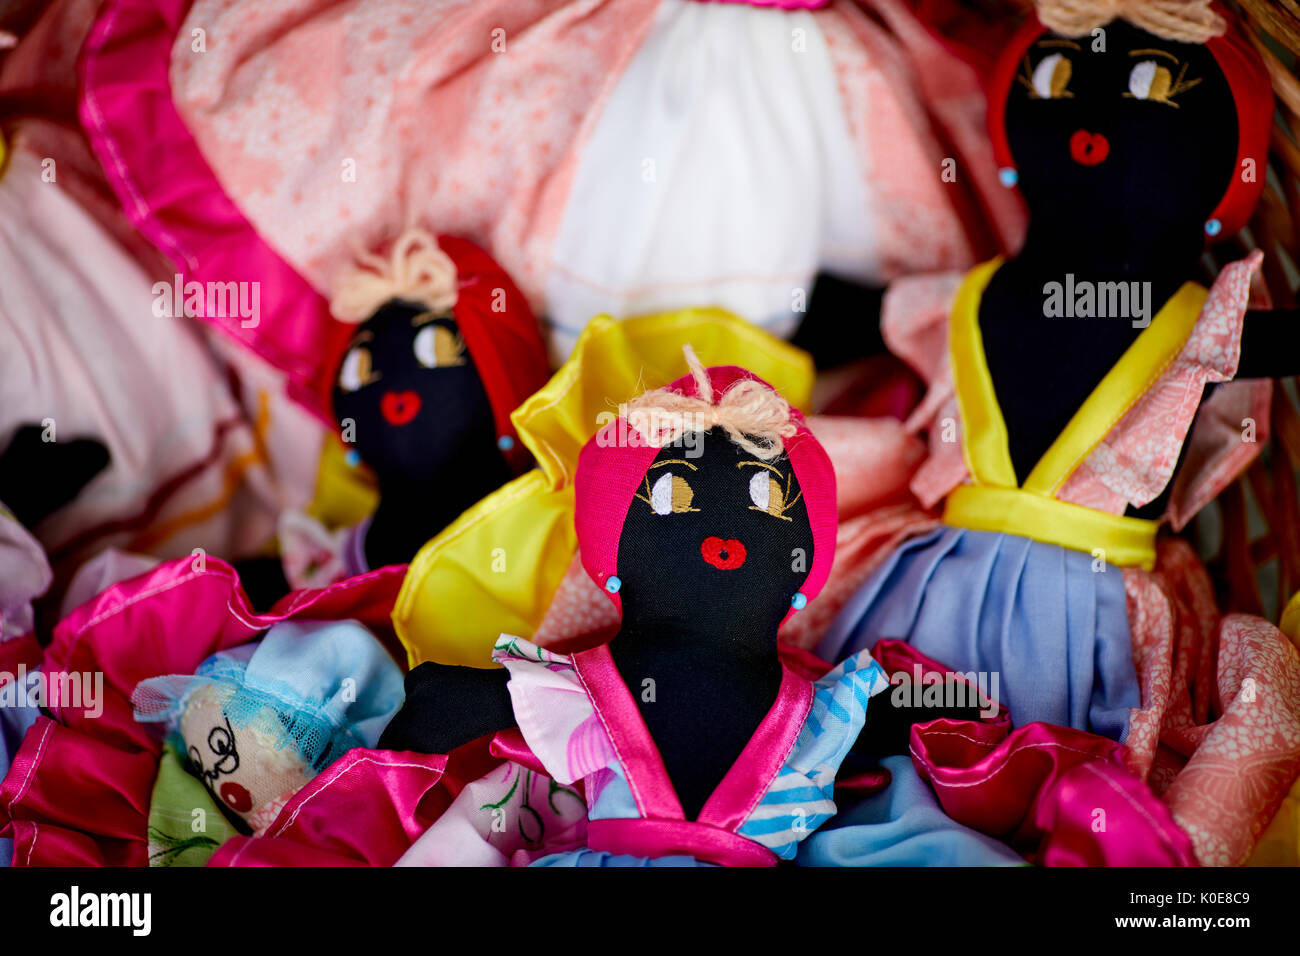 Cuban toy  Old Black Cloth rag Dolls for sale to tourists Cuba, Caribbean island nation under communist rule Stock Photo